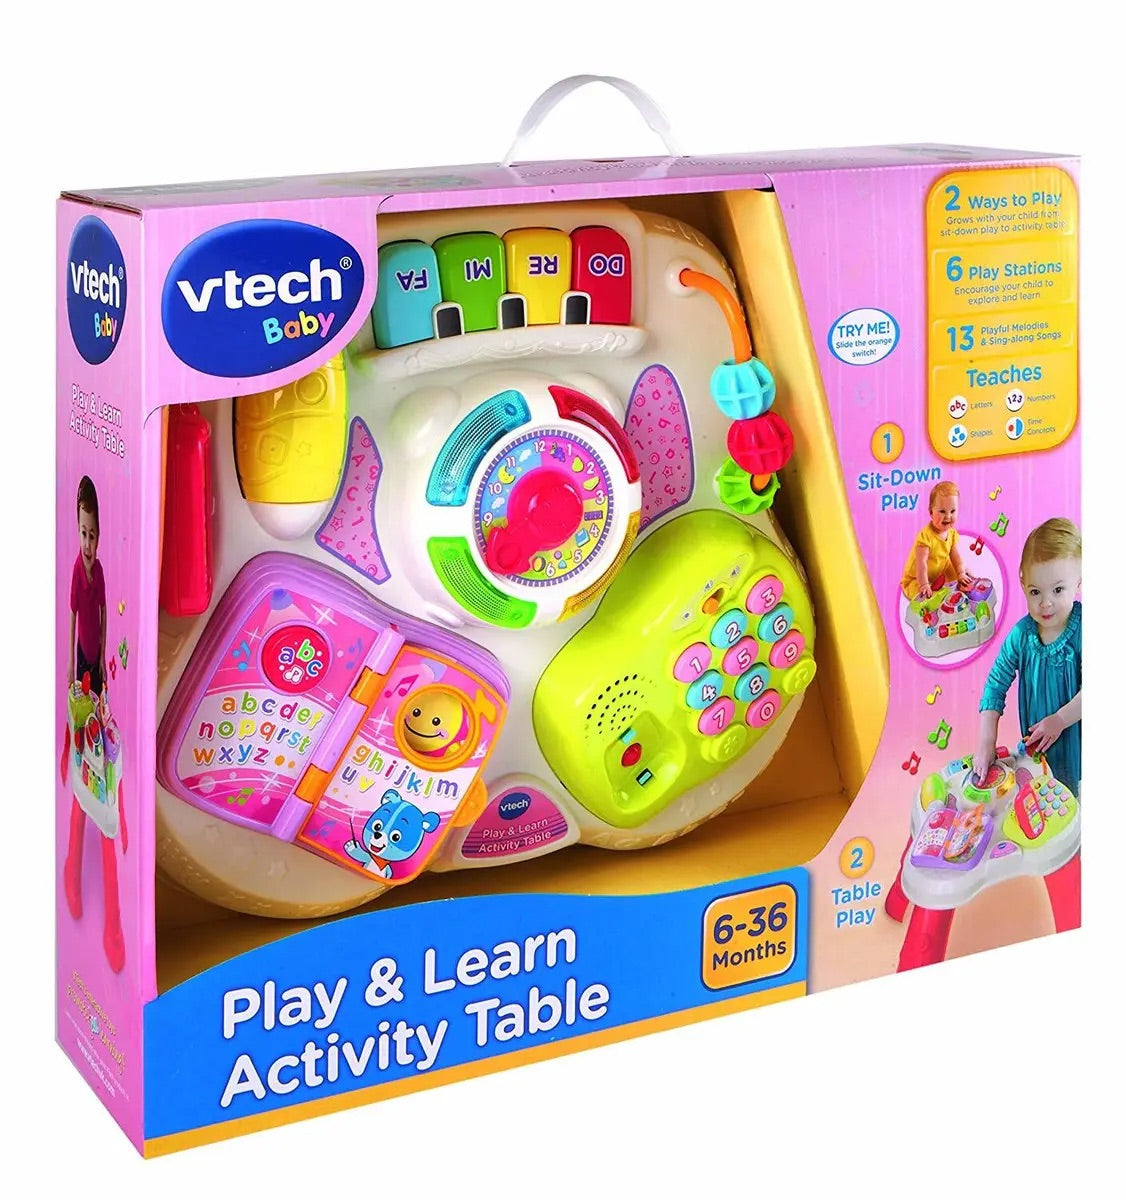 Vtech - Play & Learn Activity Table Pink